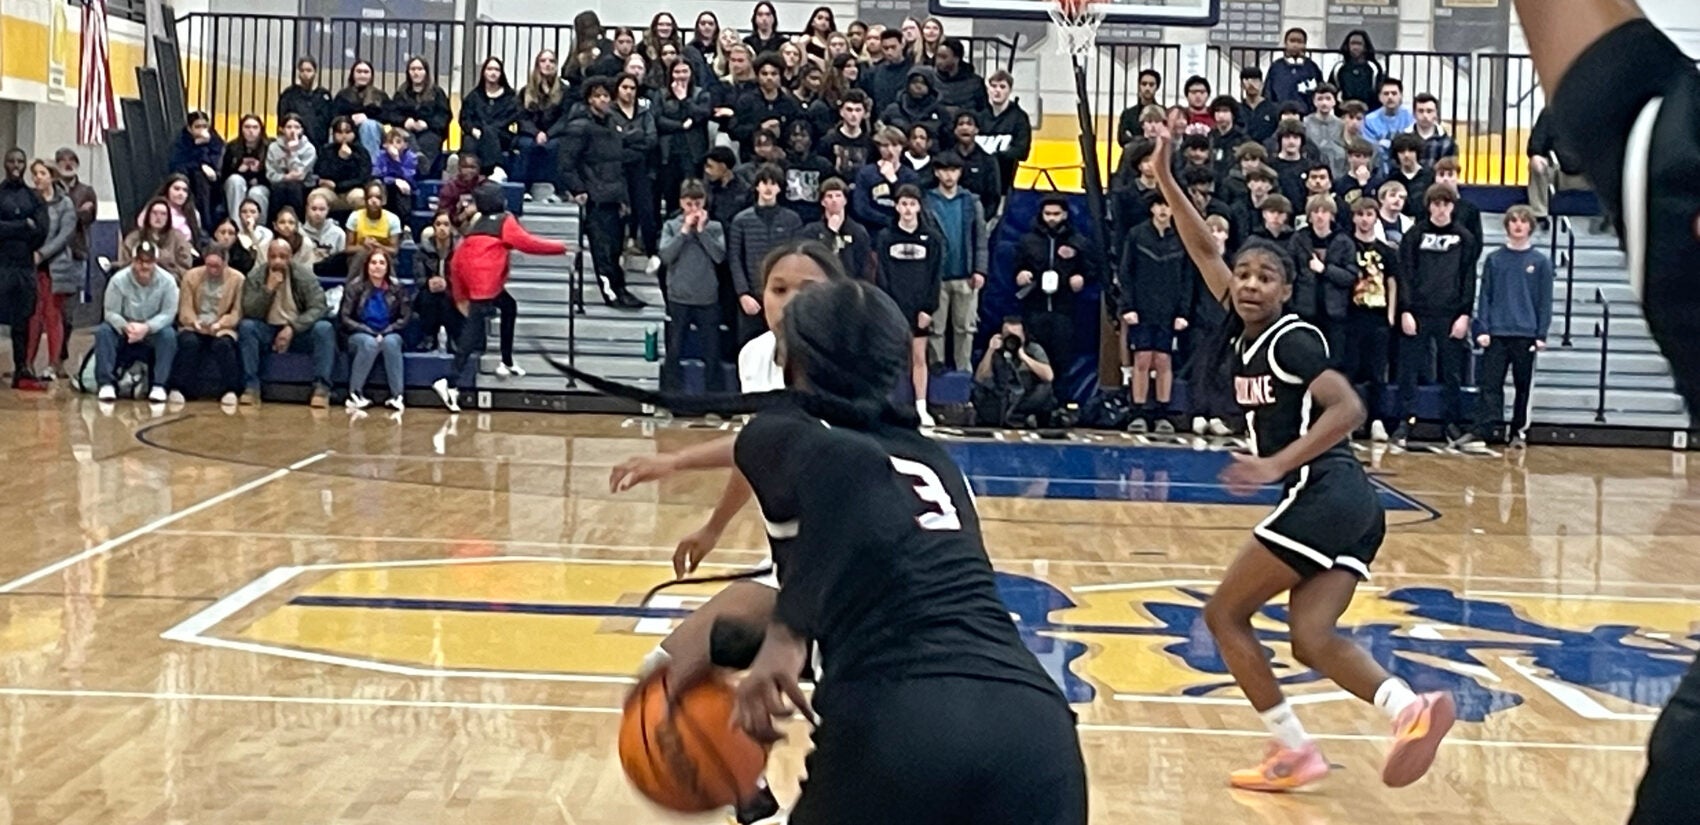 A scene from the basketball game